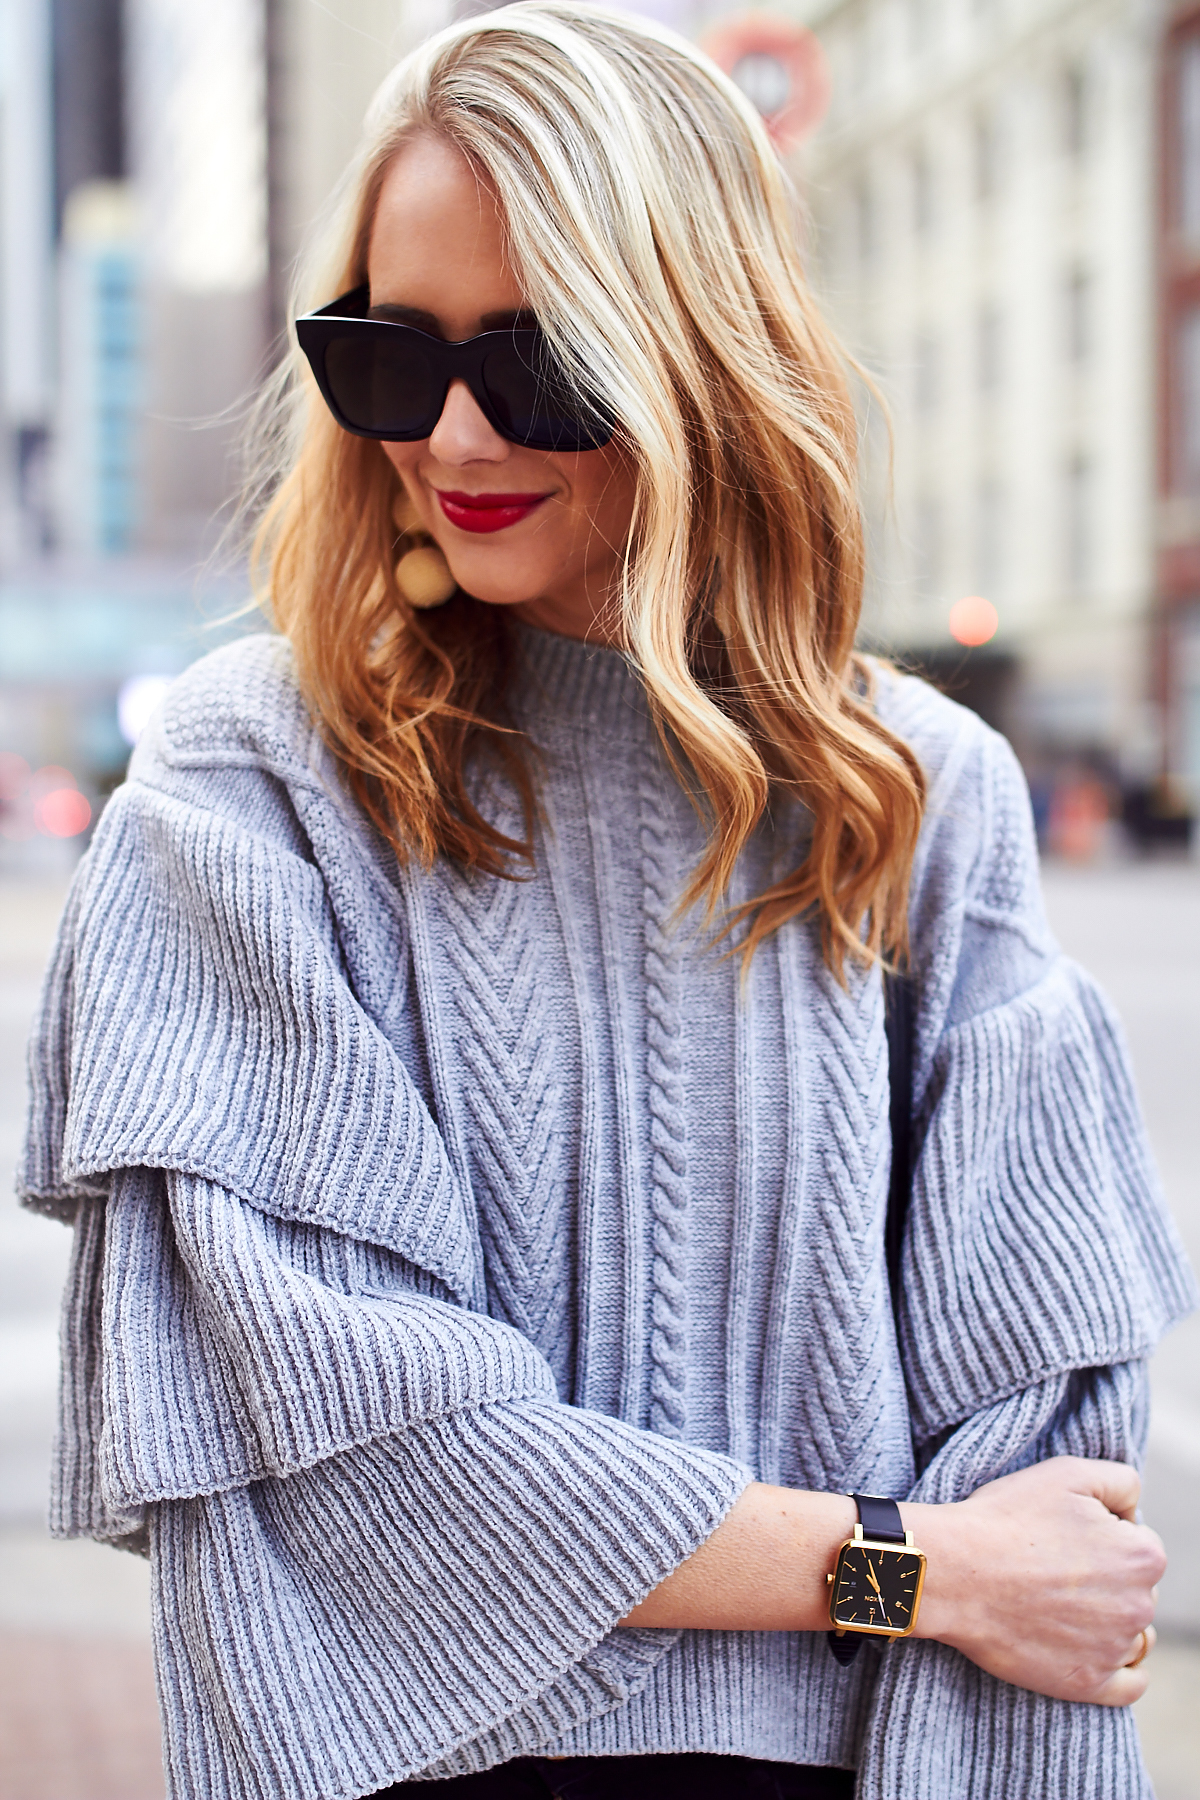 Fall Outfit, Winter Outfit, Grey Ruffle Sleeve Sweater, BonBon Earrings, Black Celine Sunglasses, Red Lipstick